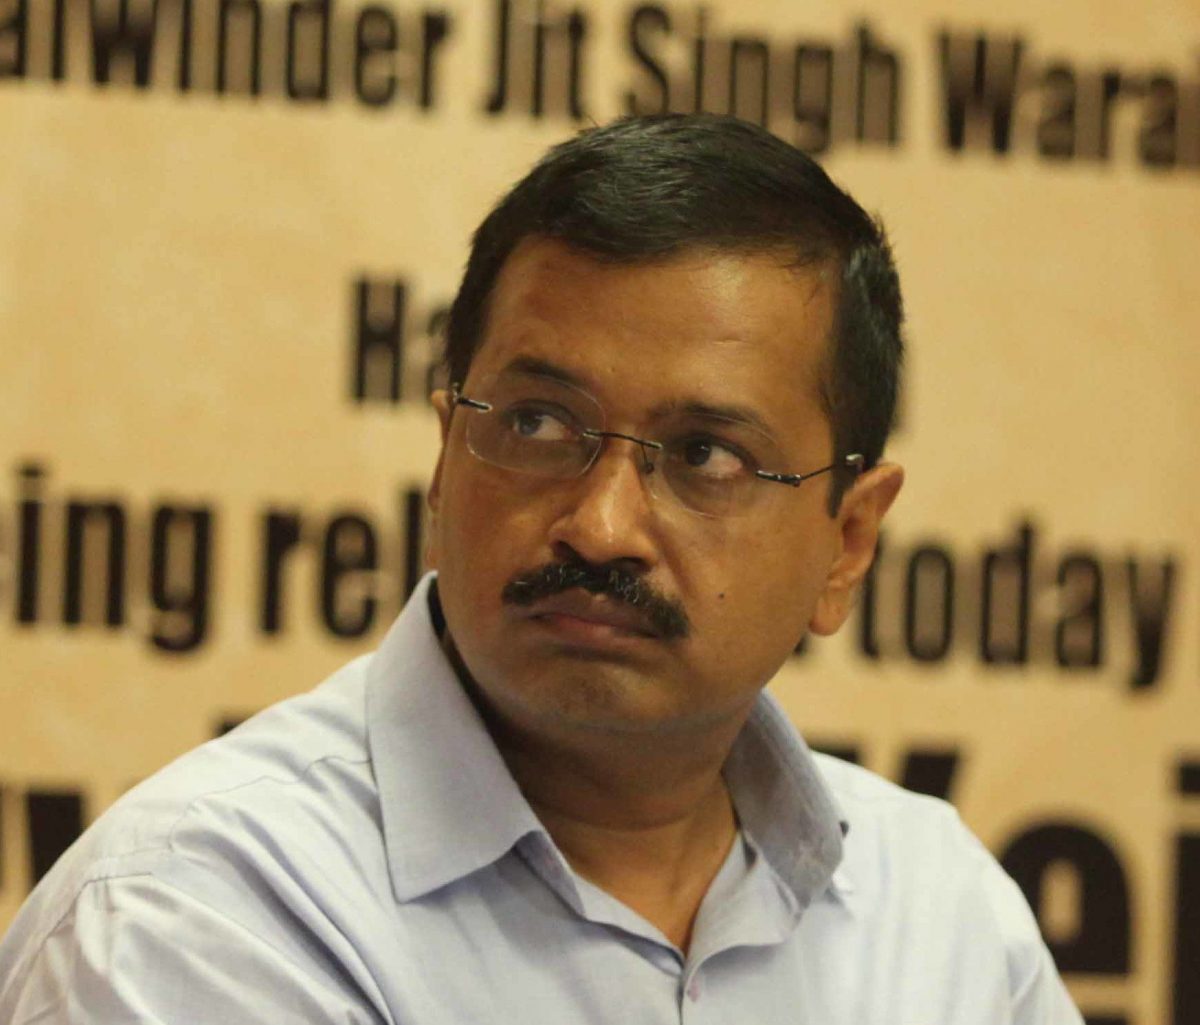 Delhi HC stays Arvind Kejriwal’s bail; AAP to appeal to SC against decision